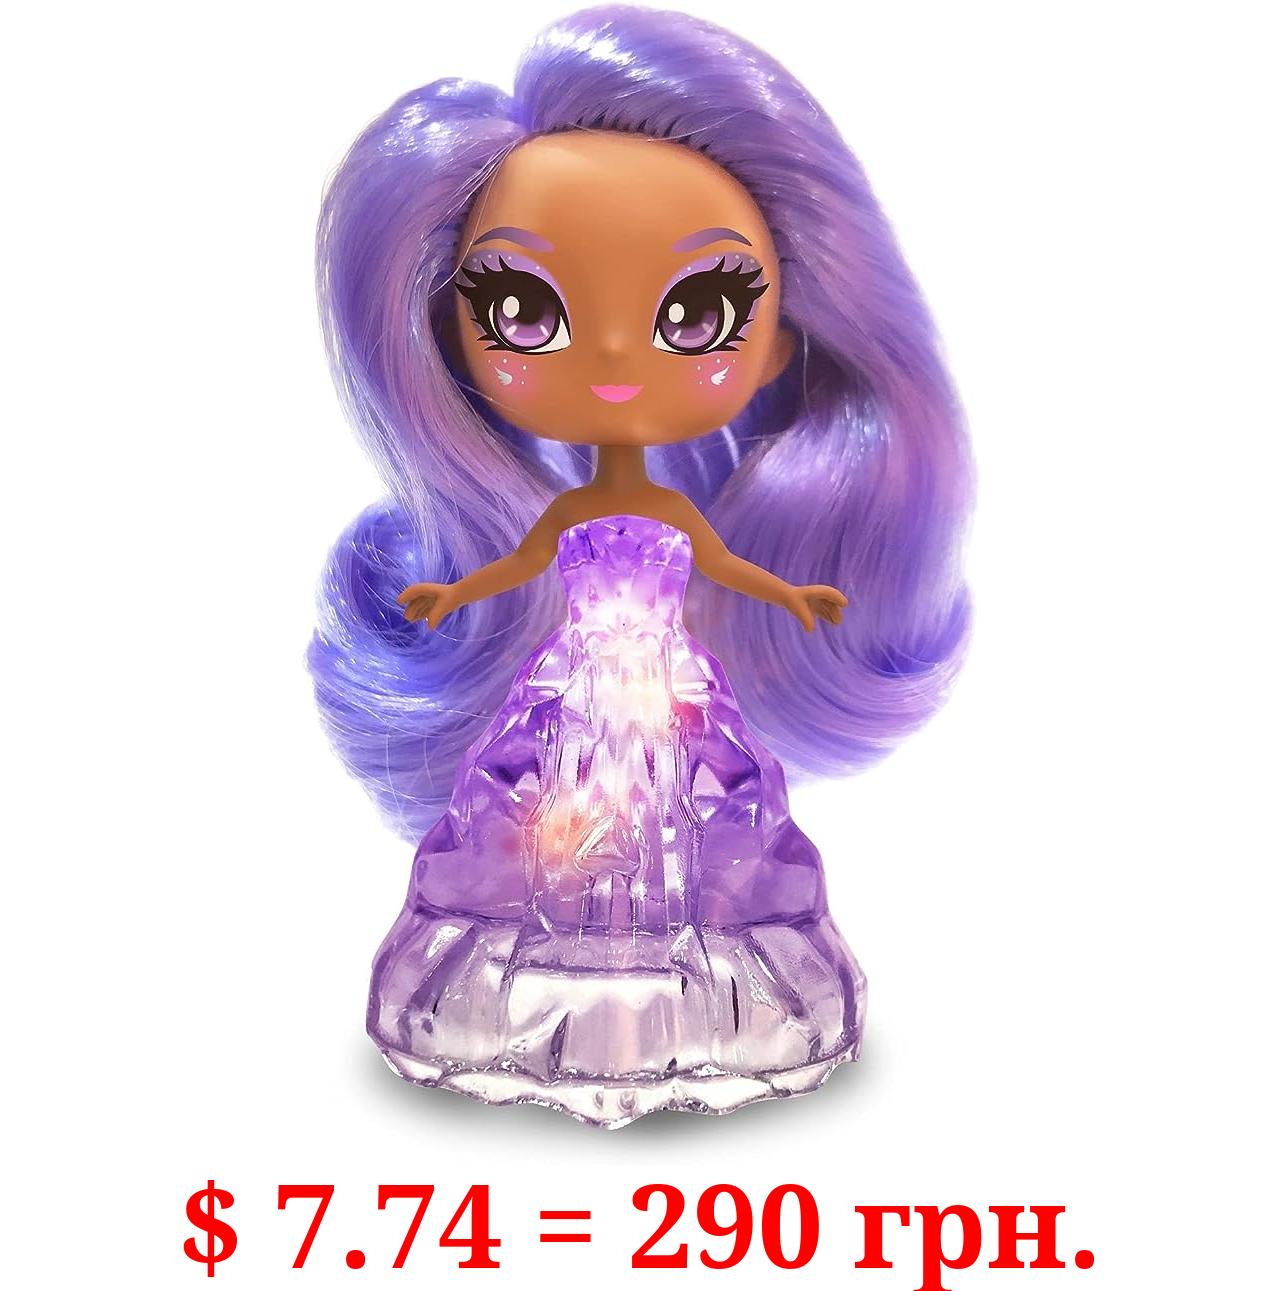 Skyrocket Crystalina Dolls - Amethyst Girls Collectible Toys with Color Changing LED Dress and Amulet Necklace